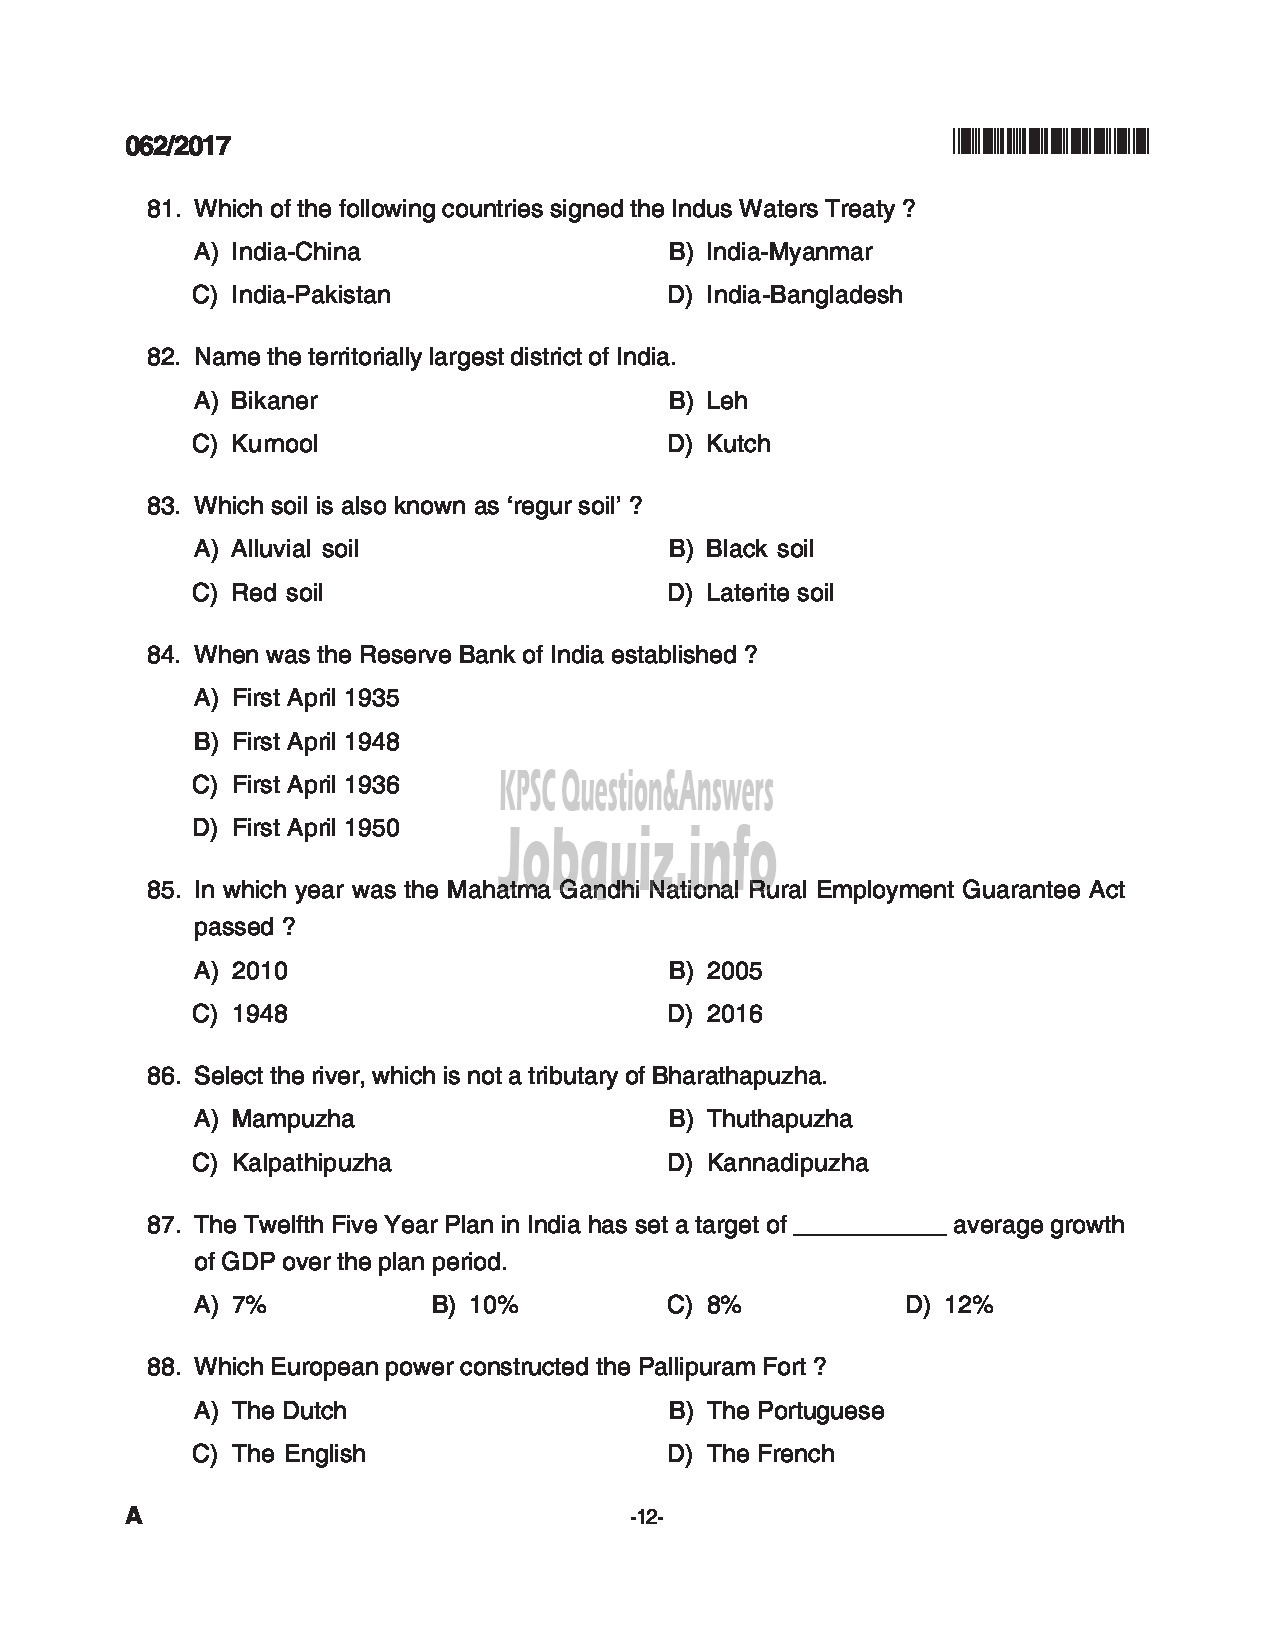 Kerala PSC Question Paper - TRADESMAN CHEMICAL ENGINEERING TECHNICAL EDUCATION QUESTION PAPER-12